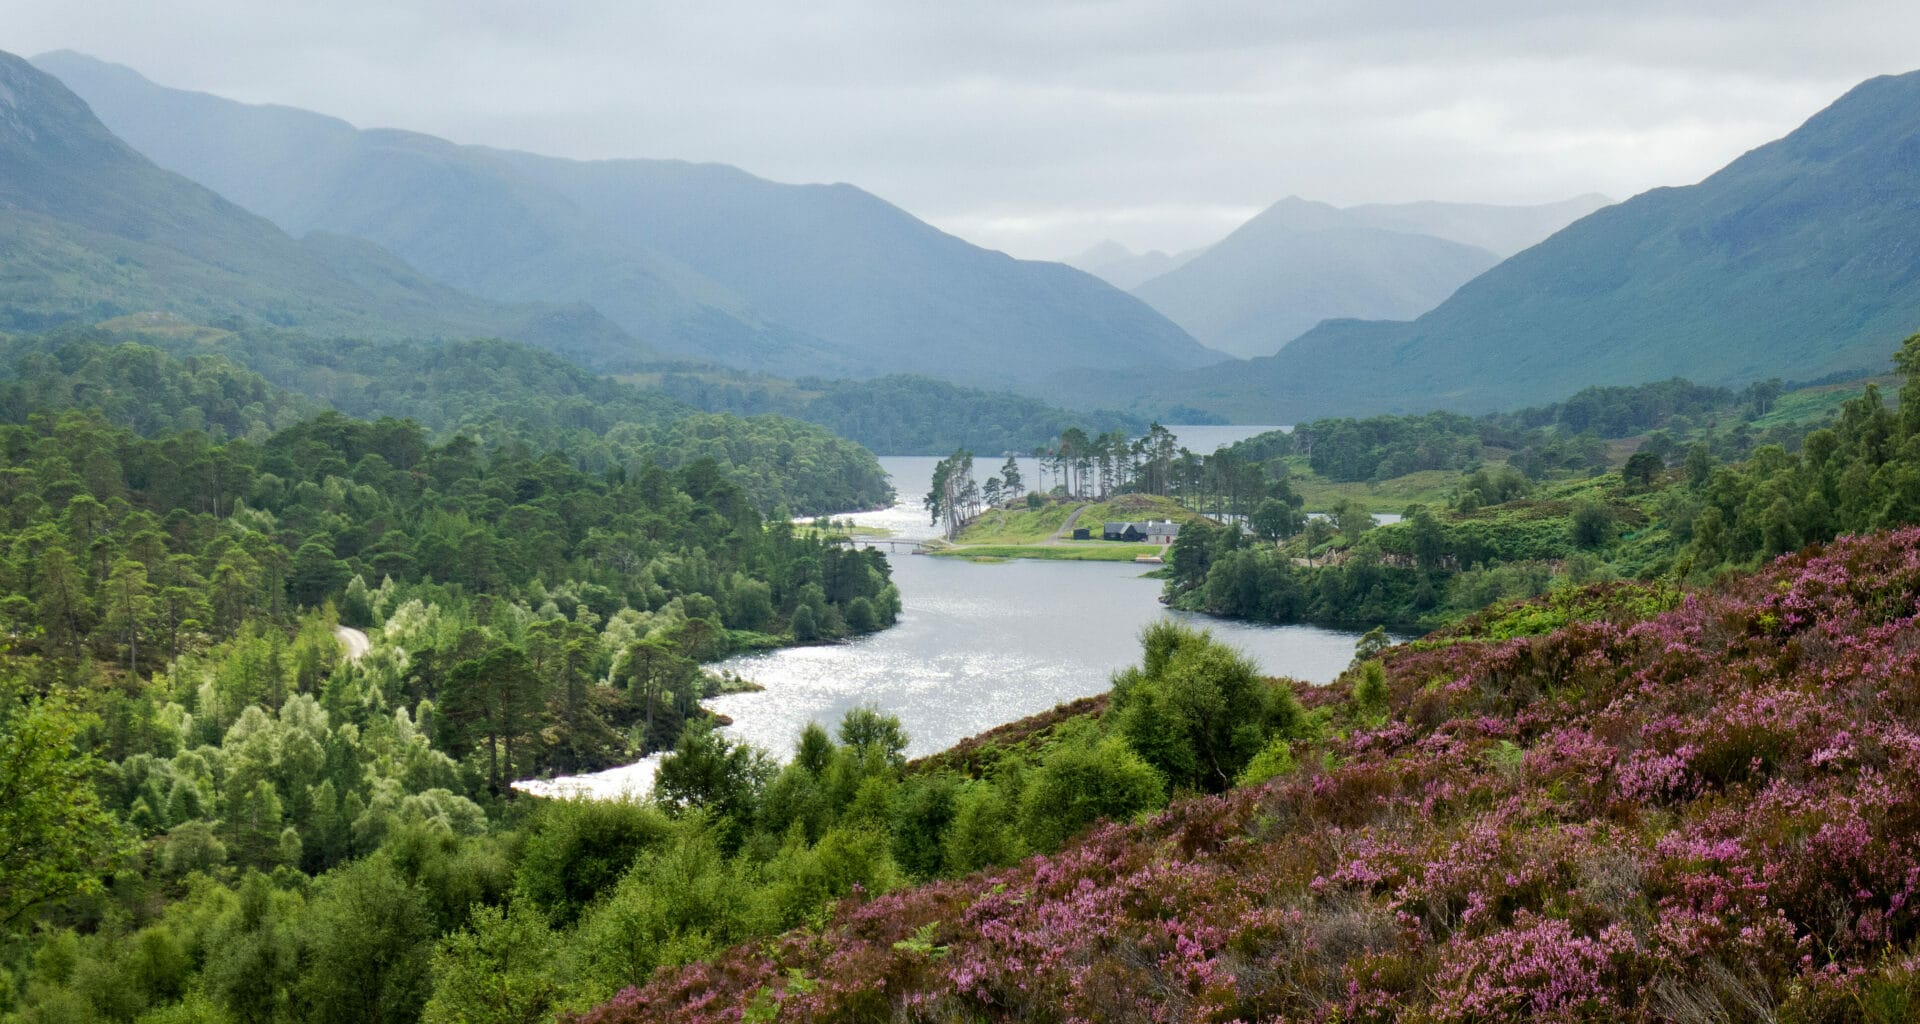 Glen Affric: Pippa Middleton’s family estate urged to stop deterring access 3